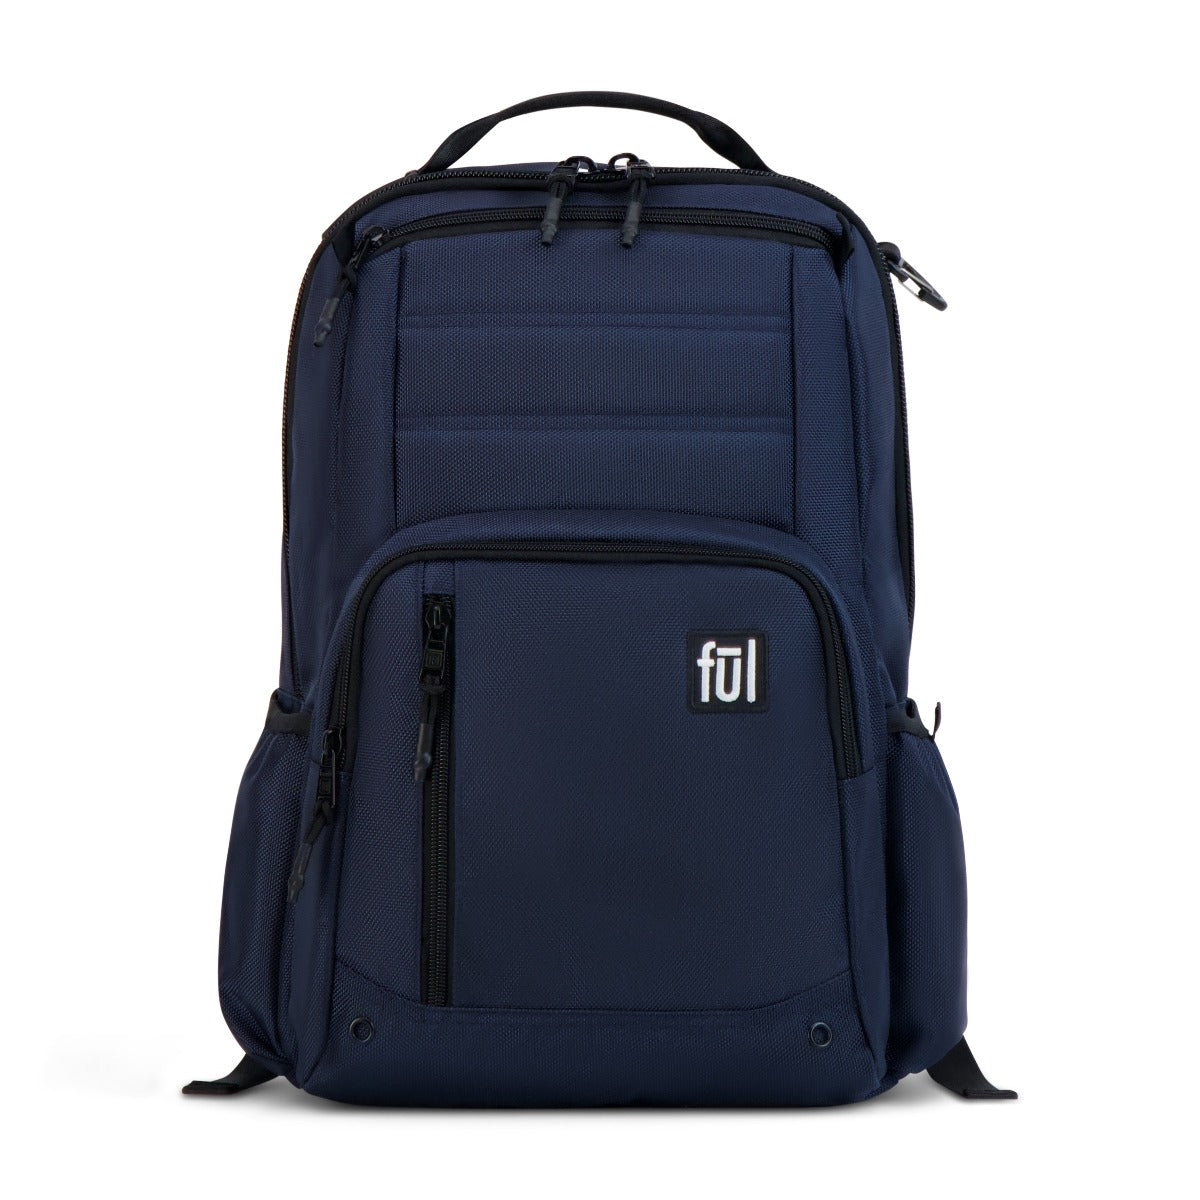 ful tactics collection phantom backpack navy blue - technology protection backpacks